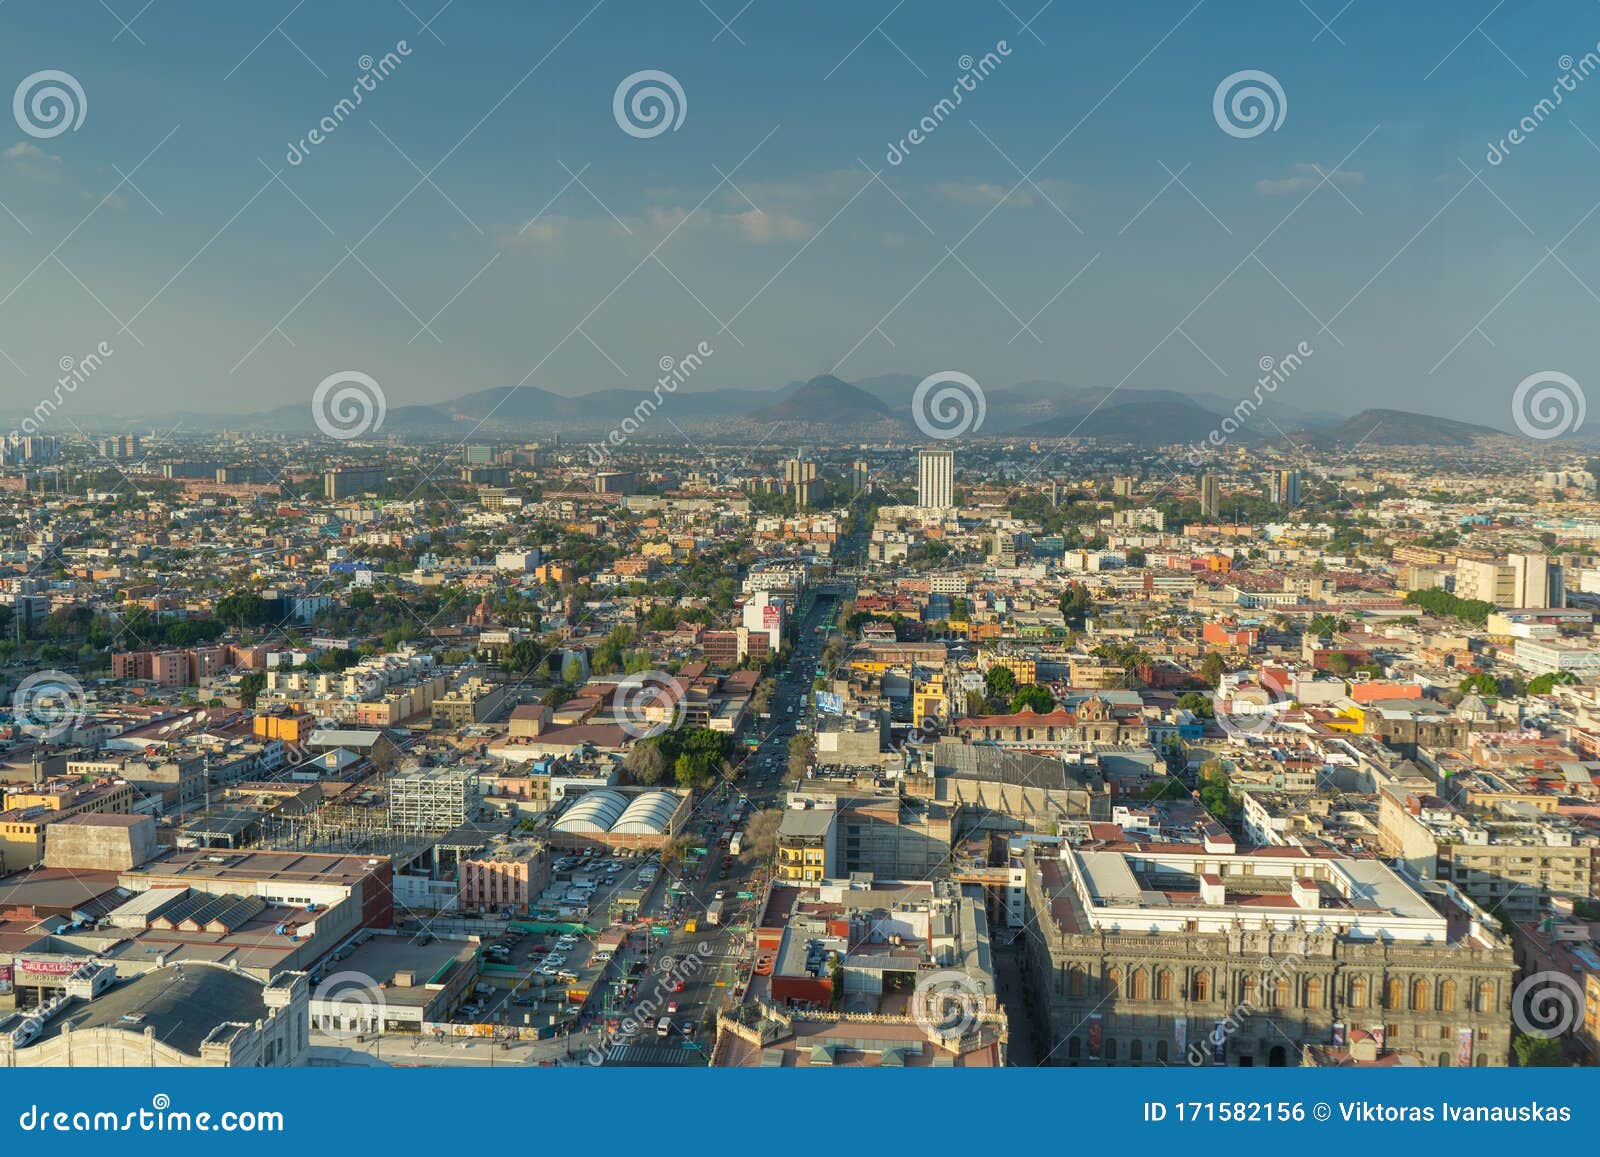 panorama of mexico city central part from skyscraper latino americano. view with buildings. travel photo, background